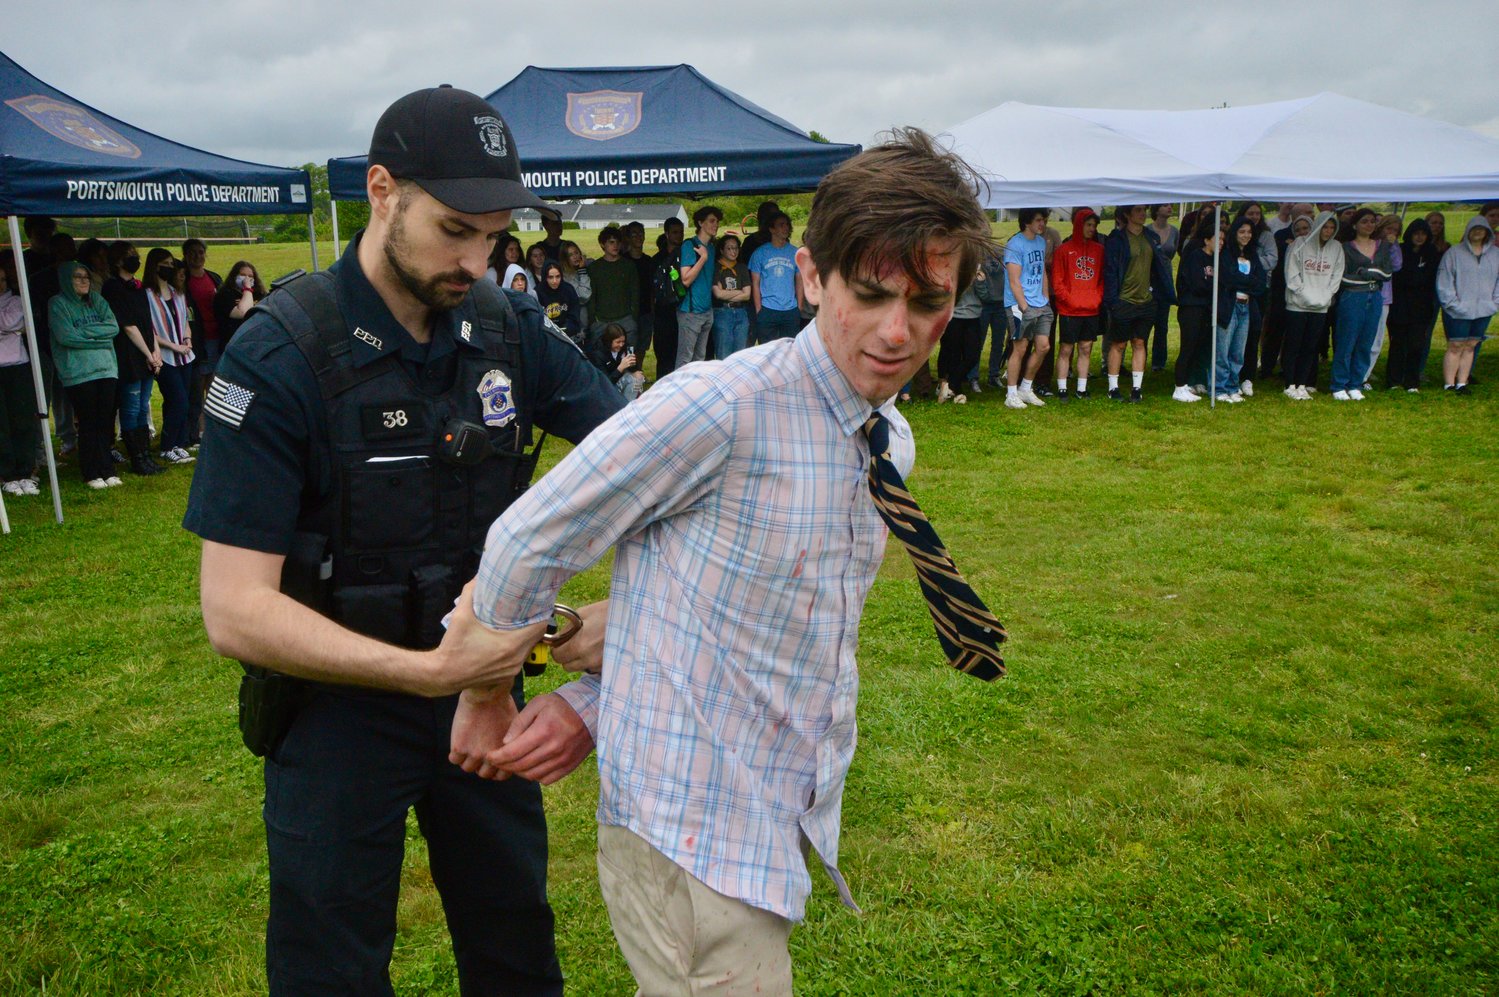 Jackson Benner is “arrested” by Officer James Thulier after failing a field sobriety test during the mock DUI reenactment.